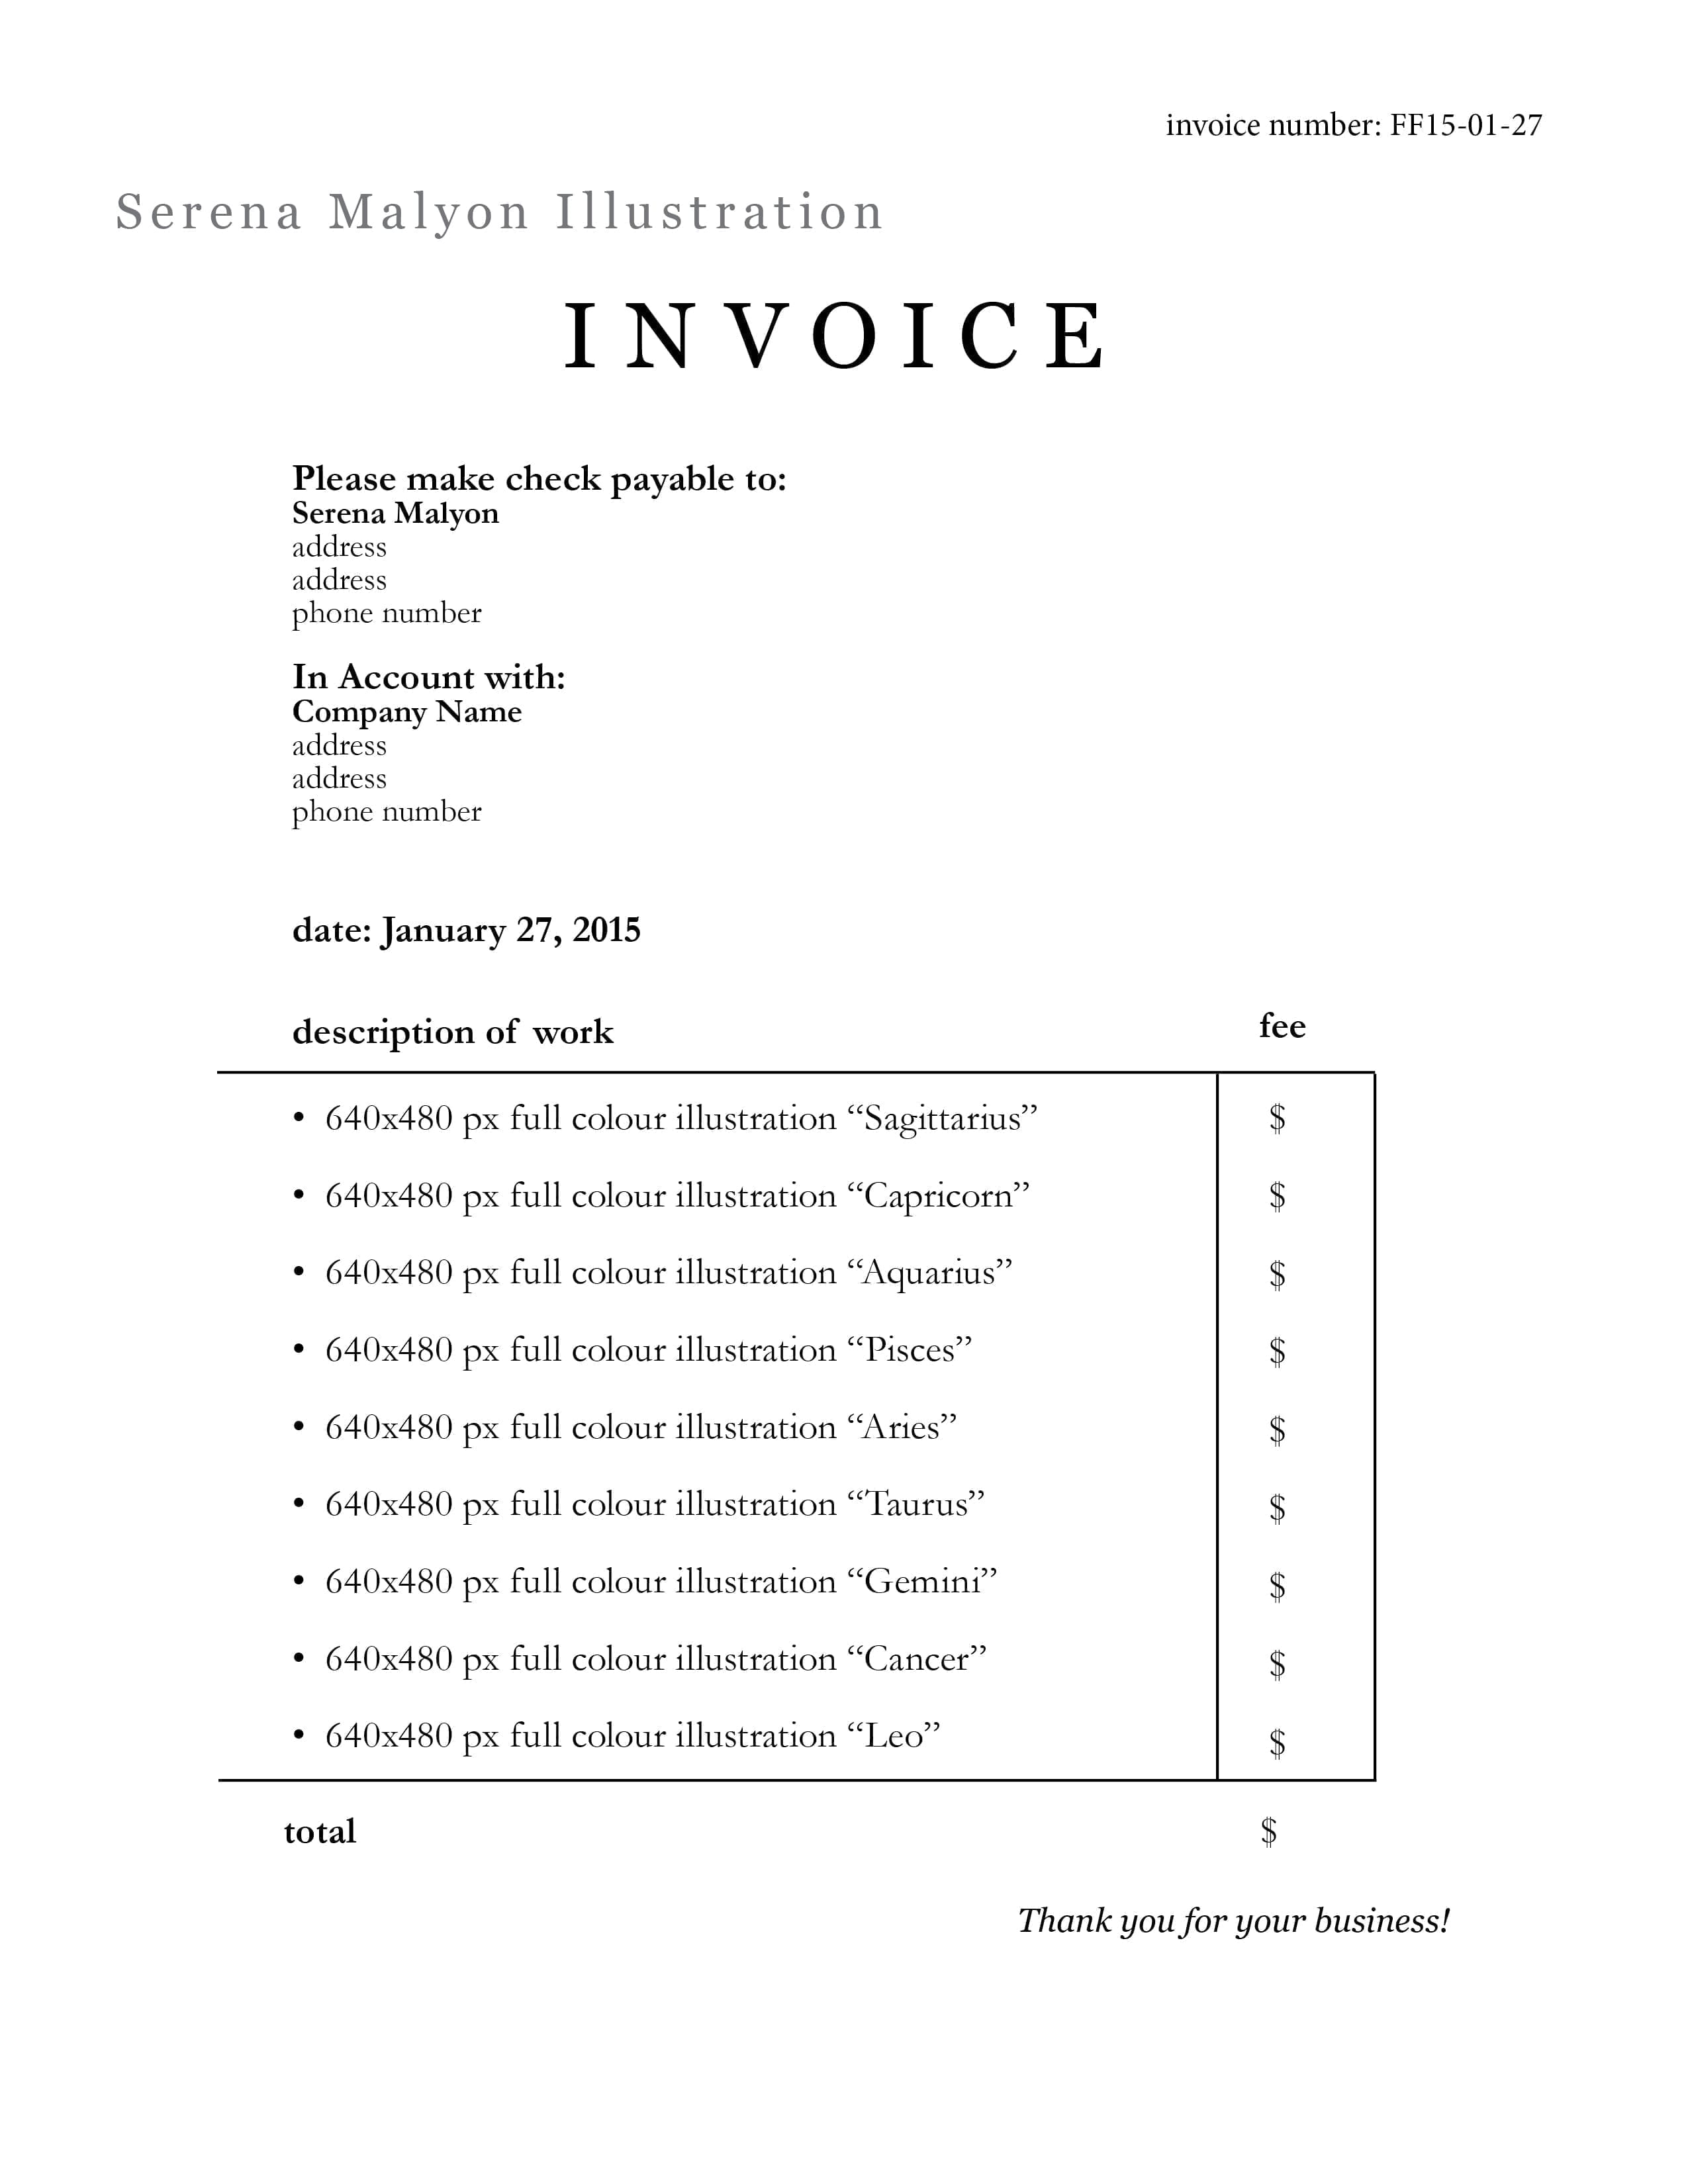 Artist Invoice Samples Spreadsheet Templates for Busines Makeup Invoice